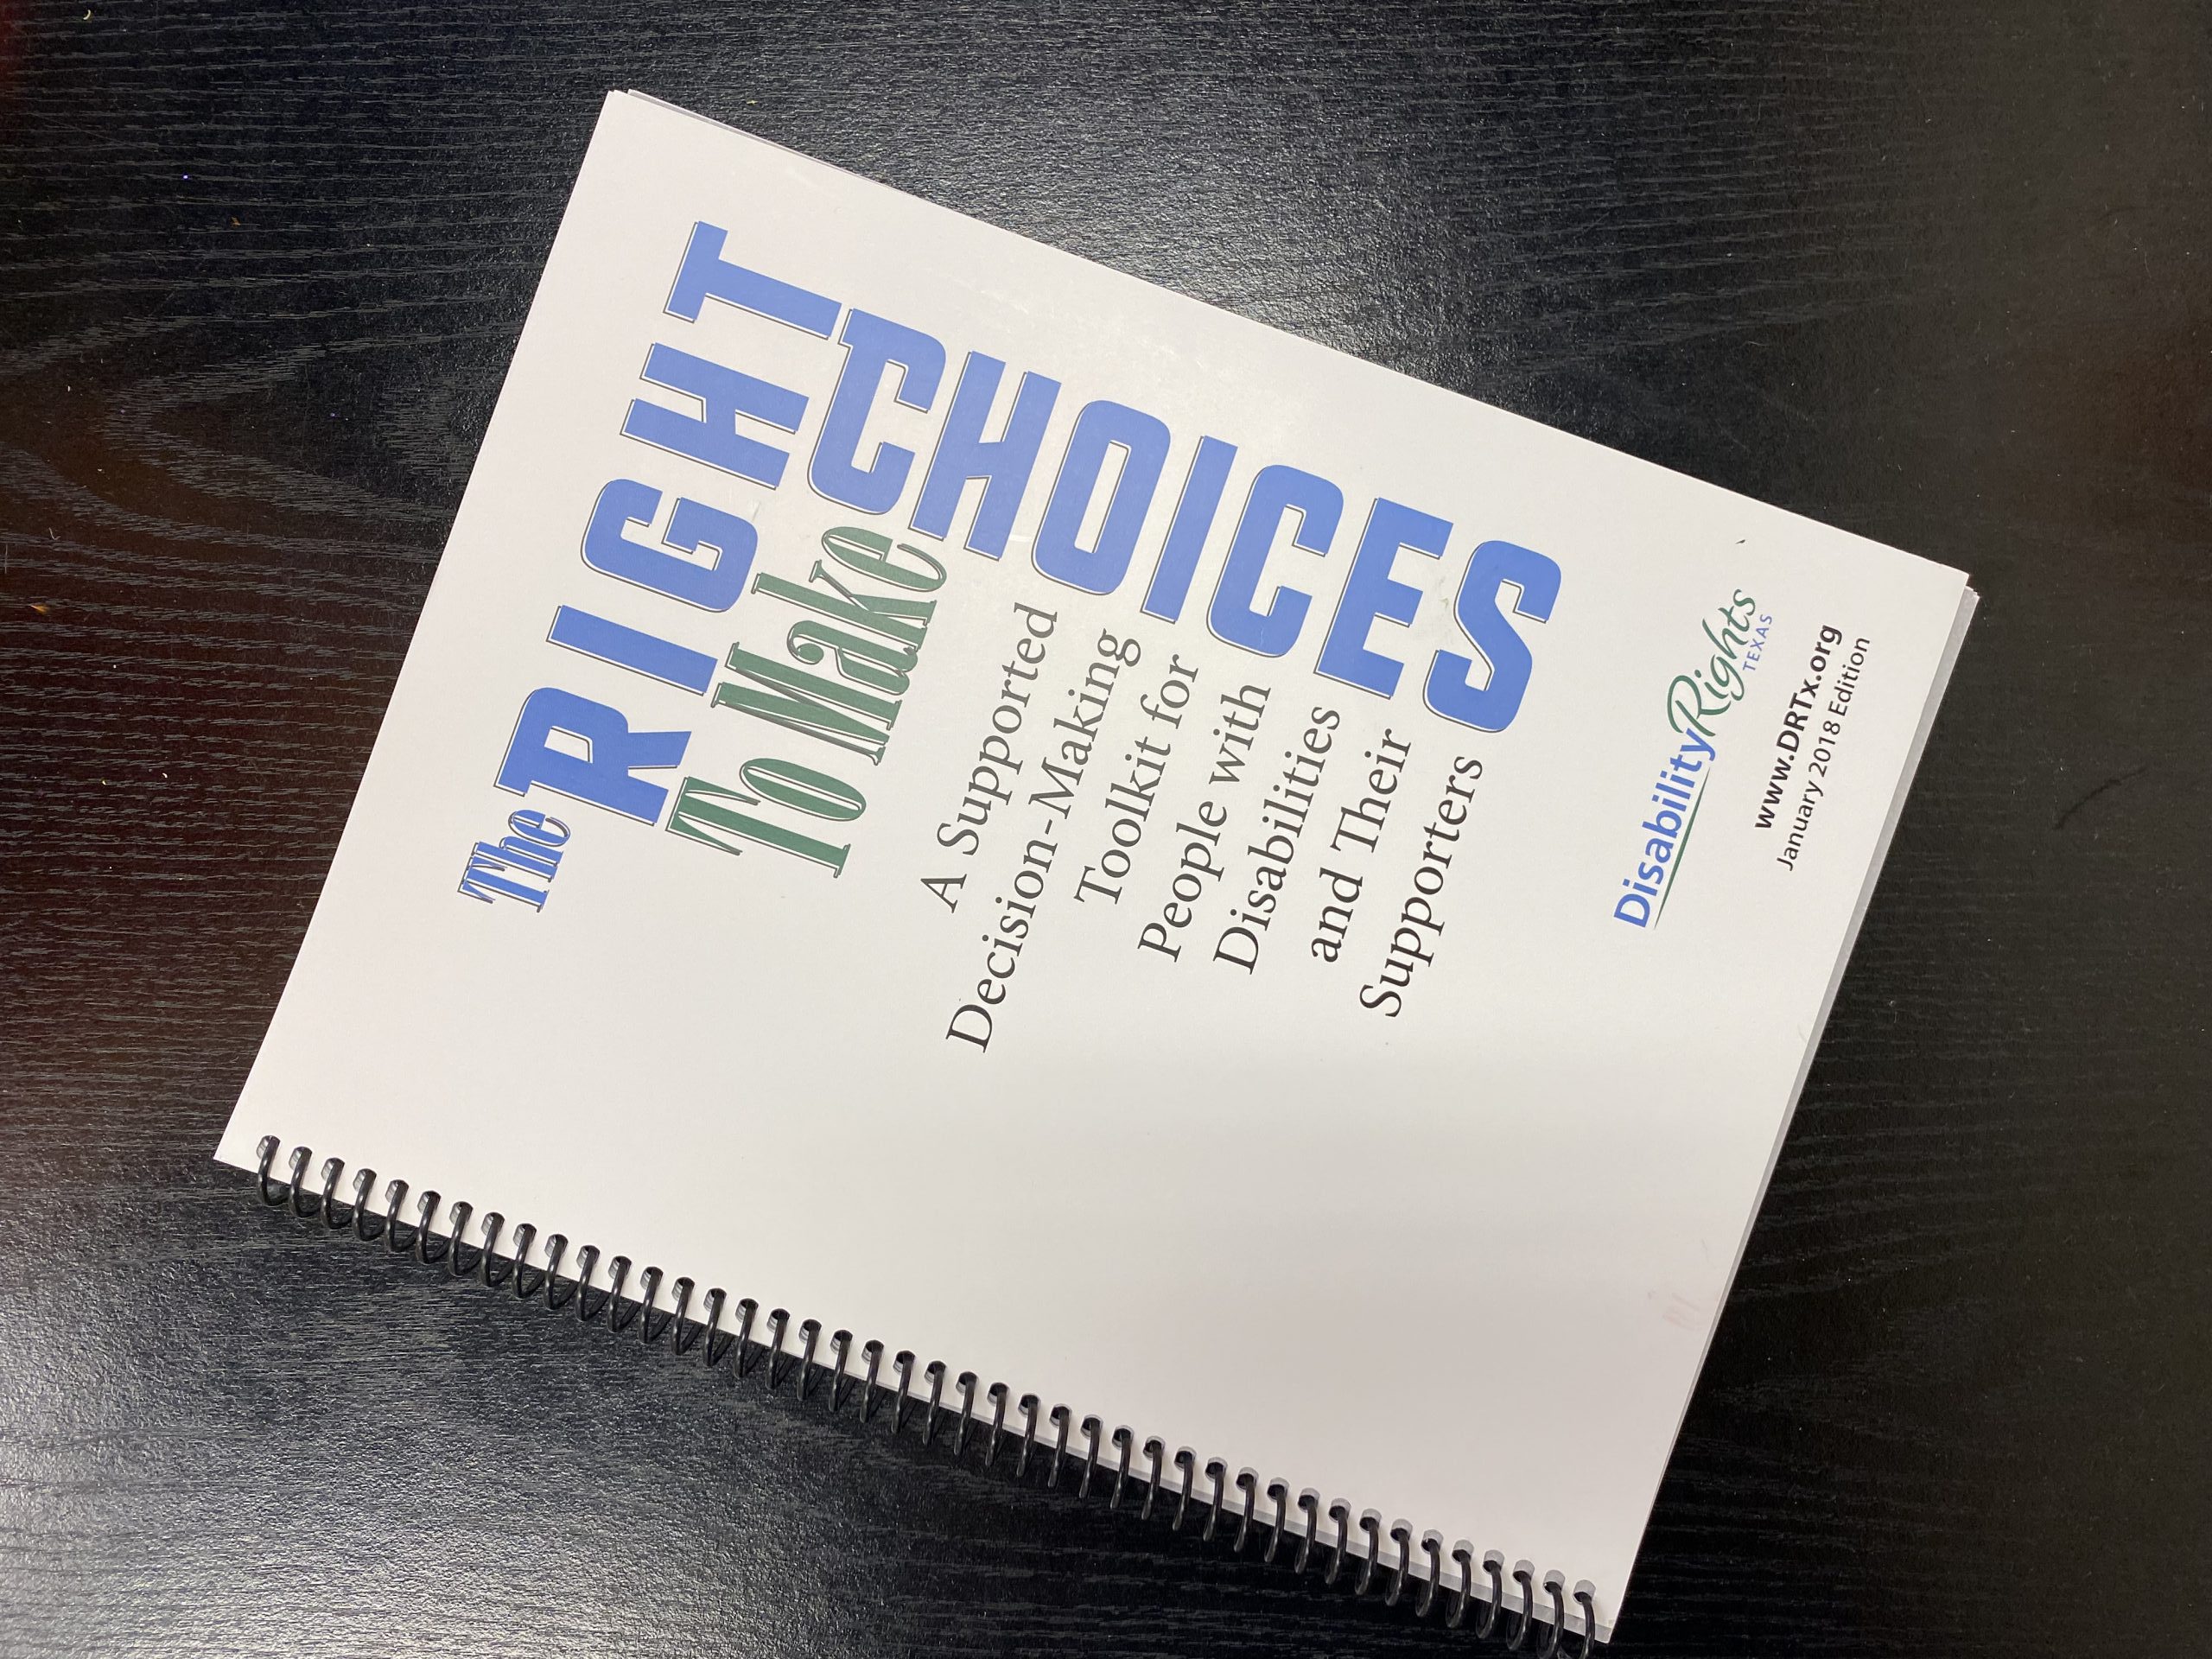 Book "The RIght to Make Choices" a supported decision-making toolkit for people with disabilities and their supporters with logo for Disability RIghts Texas, url of www.drtx.org January 2018 Edition atop black background